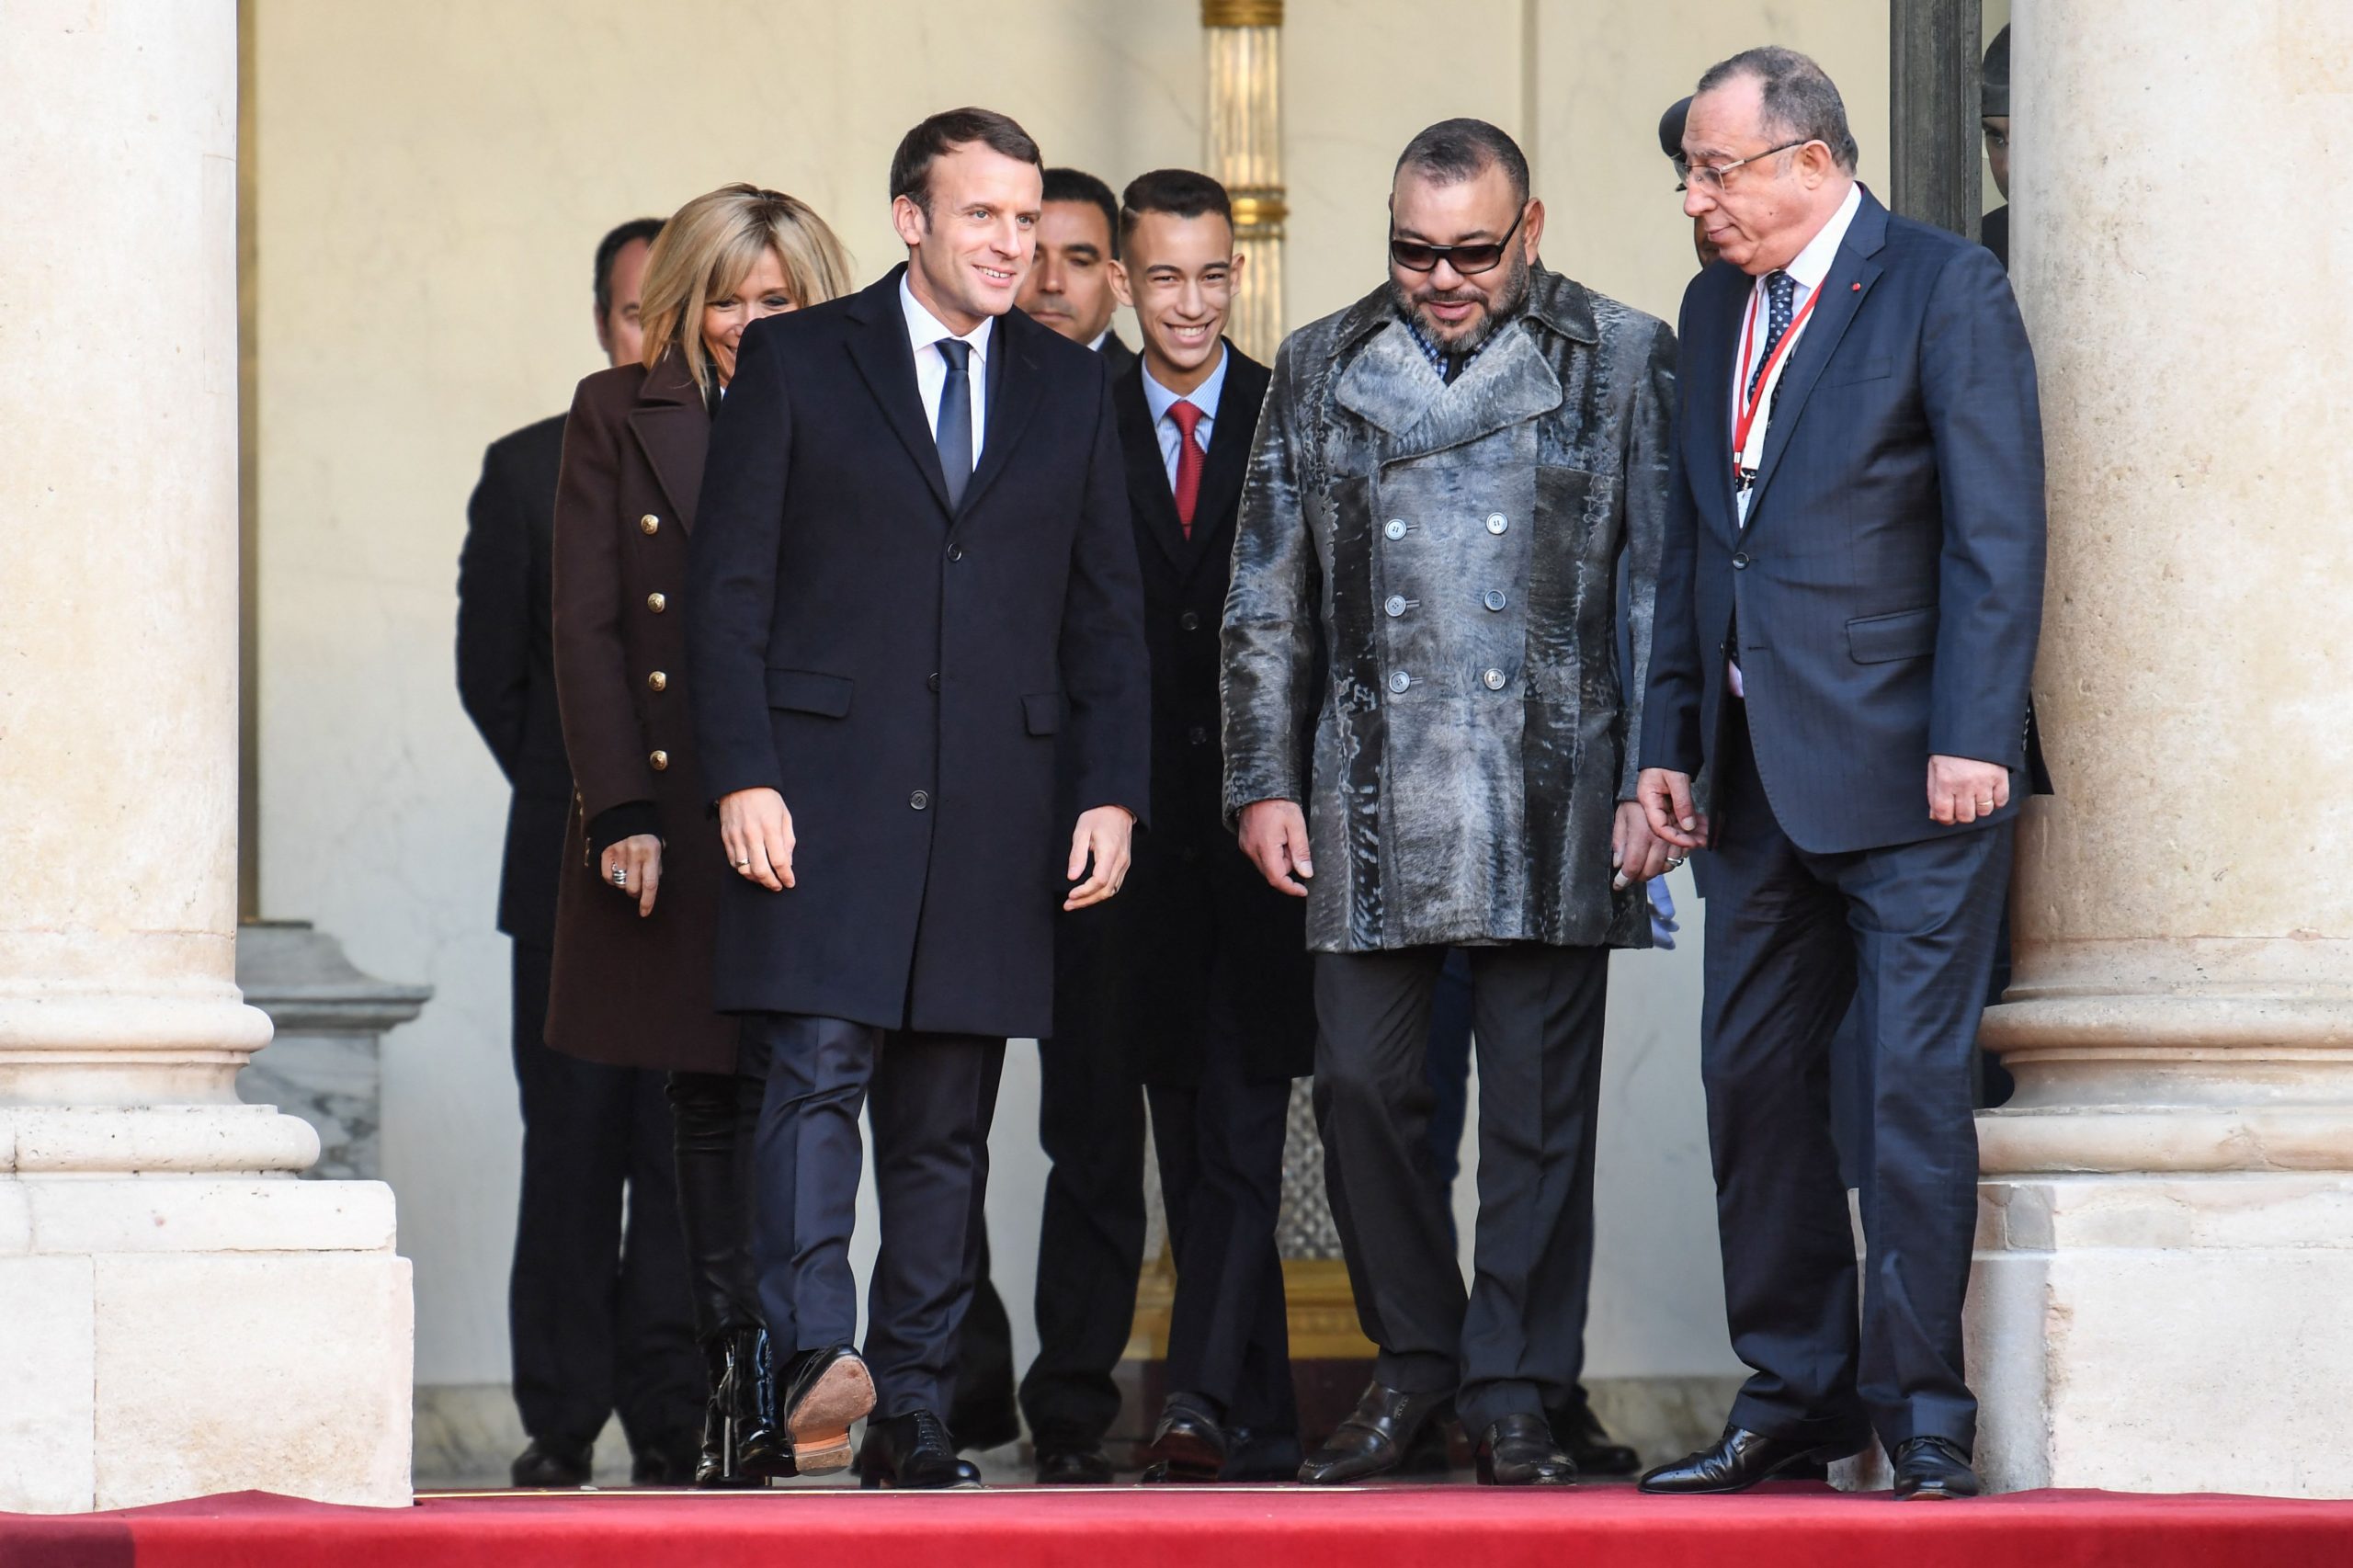 King Mohammed VI of Morocco photo 3